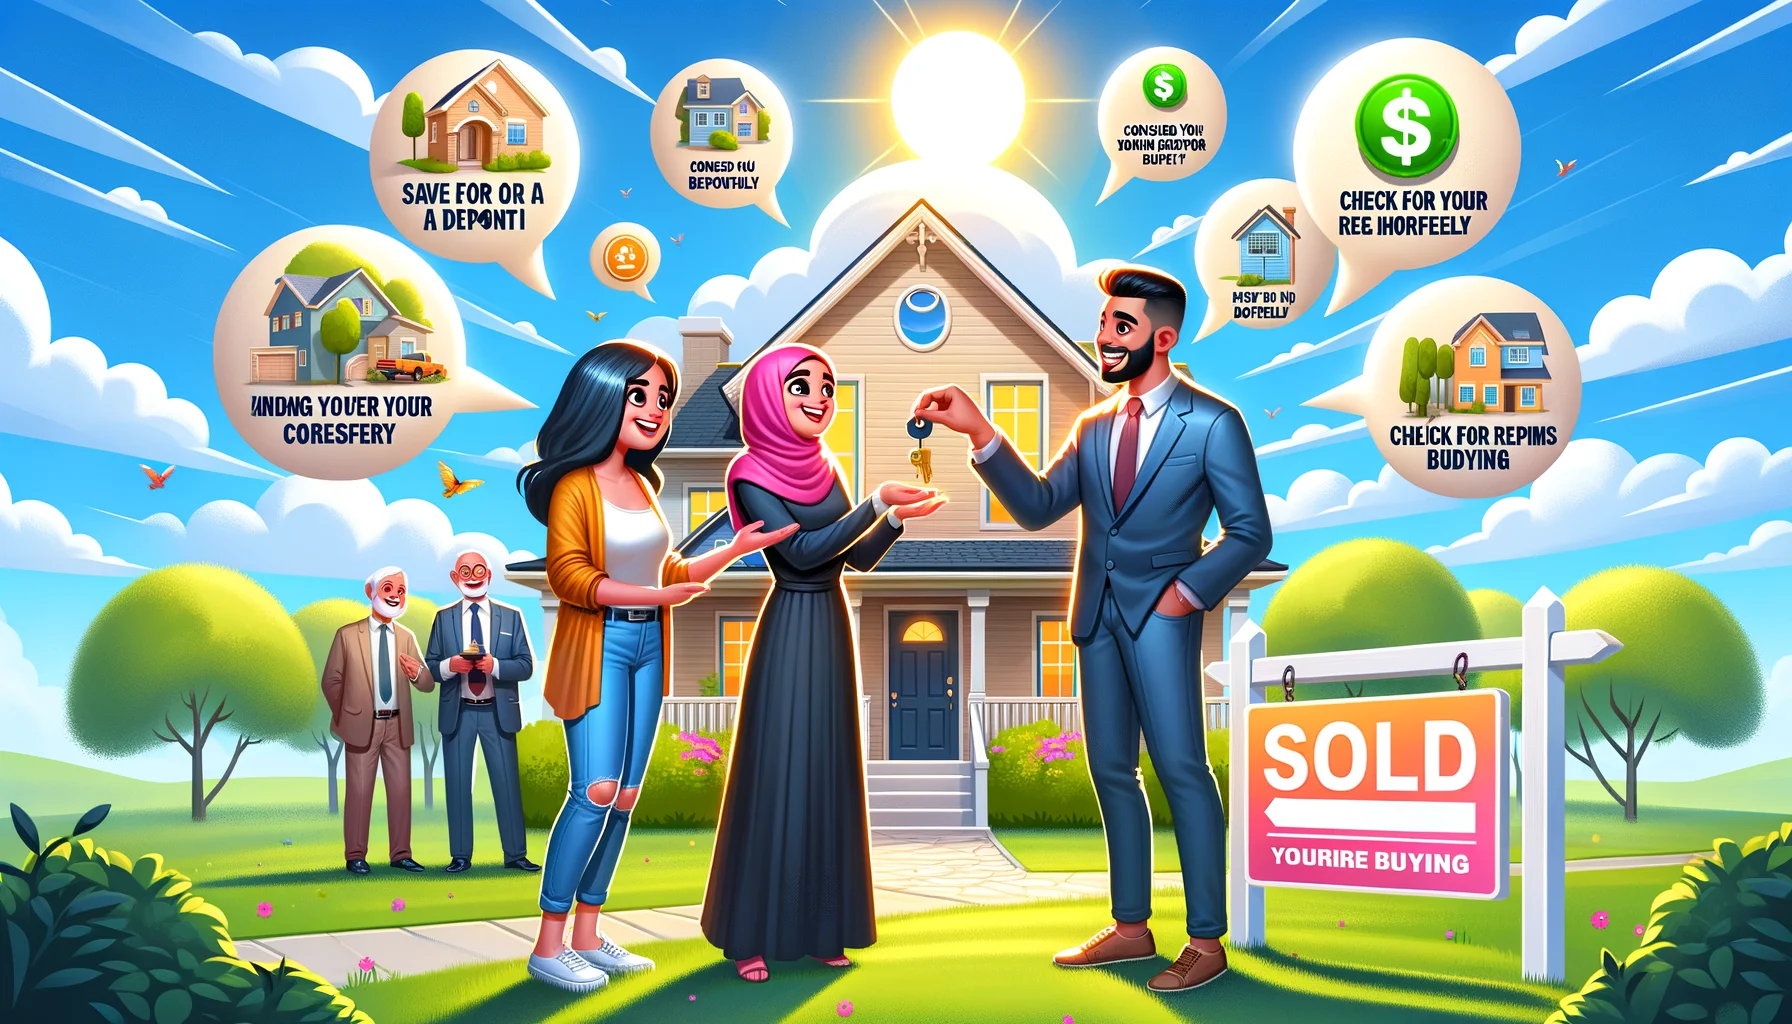 An amusing real-life scene showcasing first-time home buyer tips in an ideal scenario: an eager young Caucasian female realtor handing over the keys to a beautiful suburban house to an ecstatic Middle-Eastern couple. The house, glowing under a perfect sunny sky, has a 'Sold' sign stuck in the lush green front yard. All around thematic, some fun infographics are floating in mid-air depicting tips: 'Save for a deposit,' 'Consider your budget carefully,' 'Check for repairs before buying,' etc., emphasized with whimsical iconography and joyful colors.